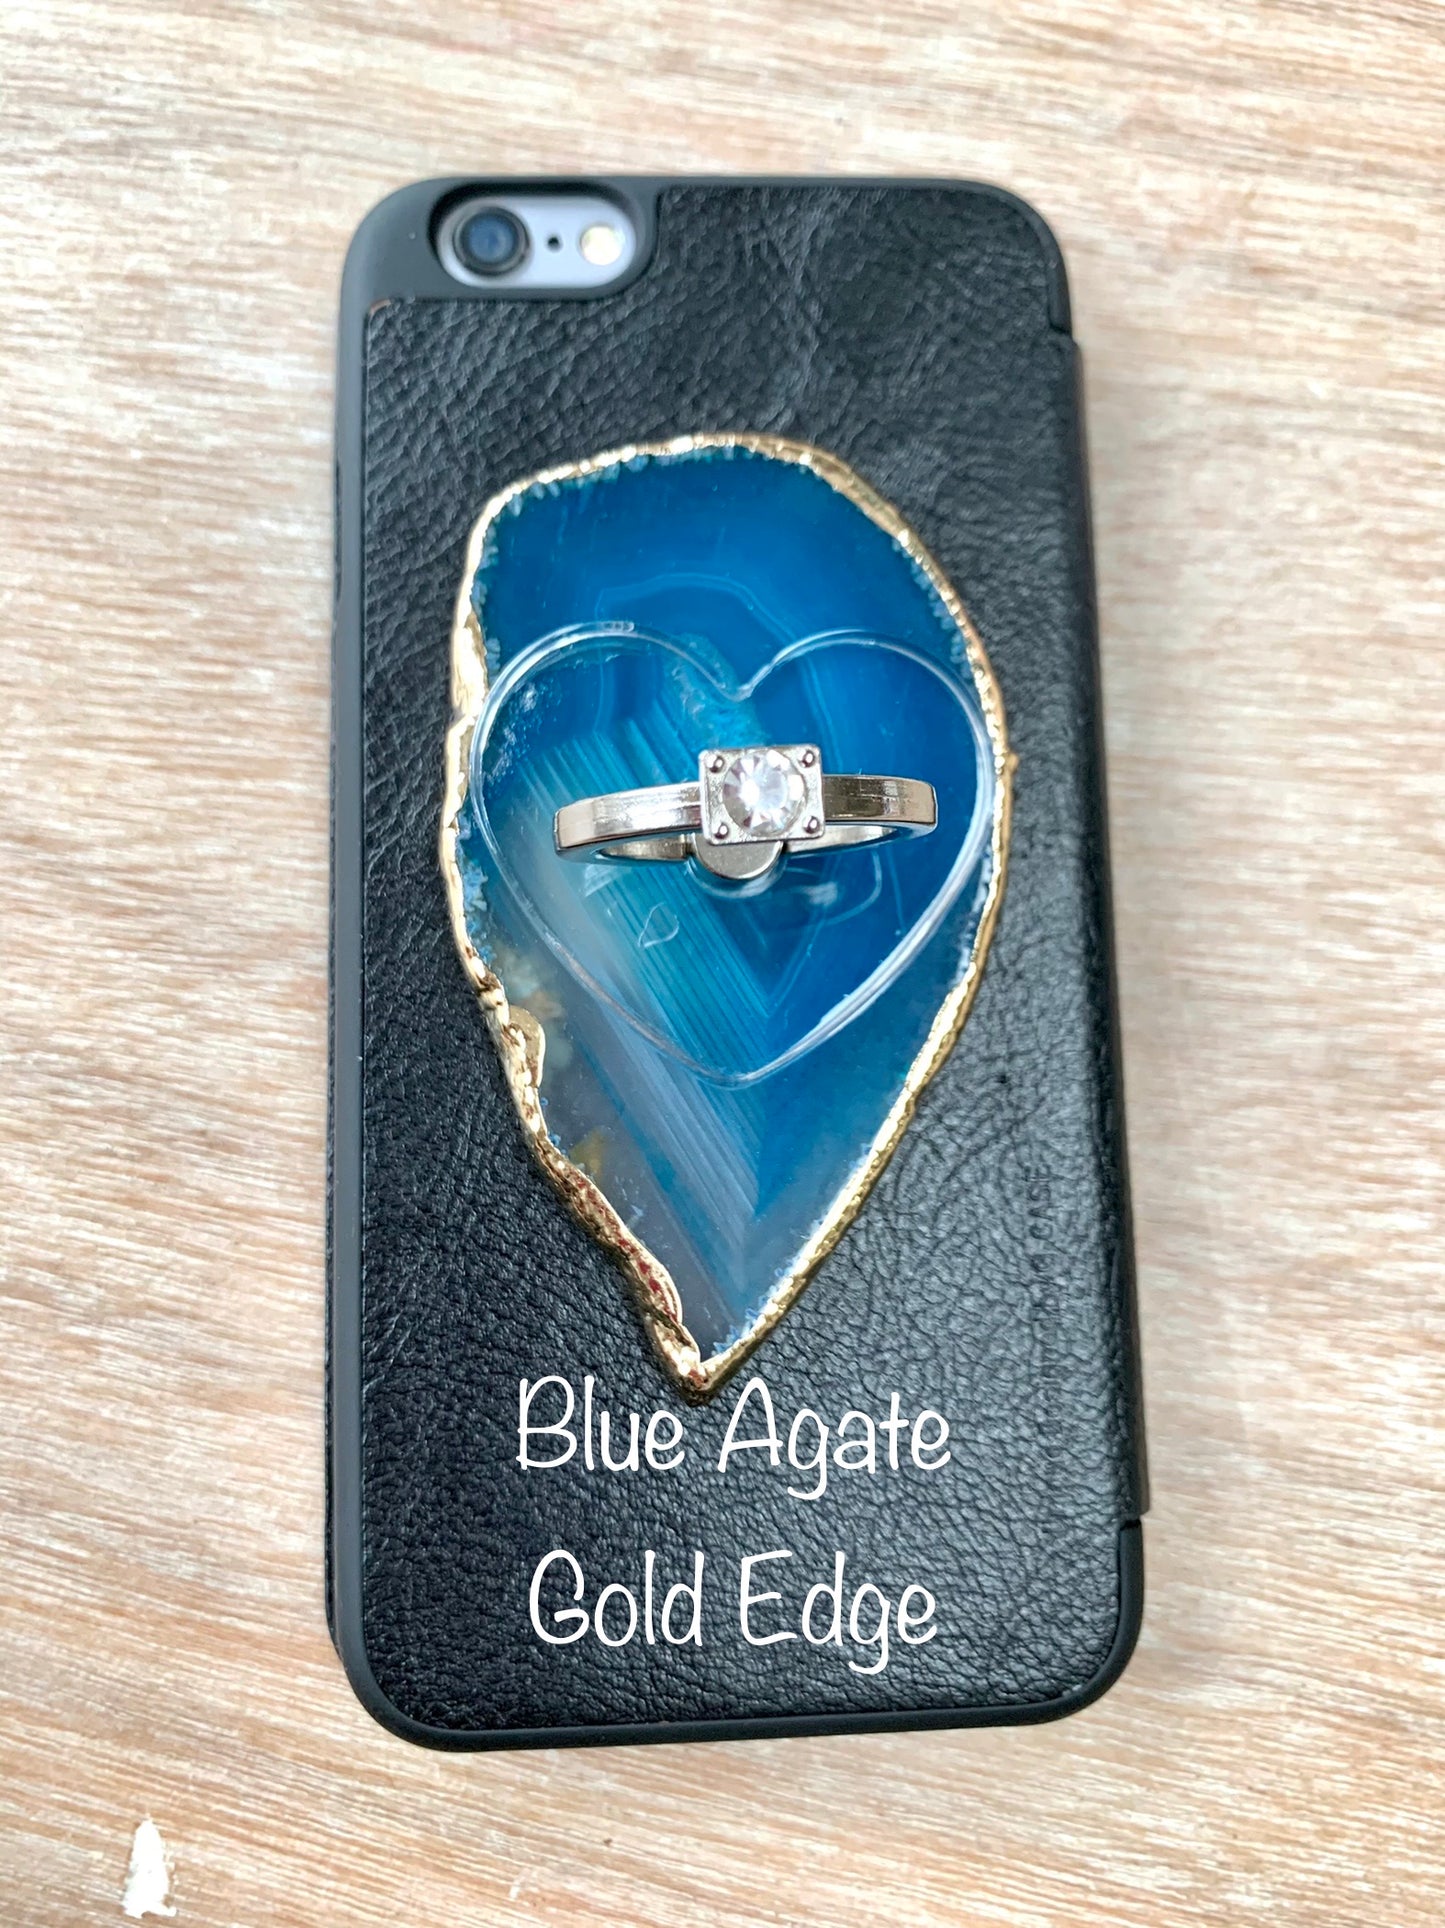 Blue Agate Crystal Phone Ring Grip - CrystalBoutique.co.uk